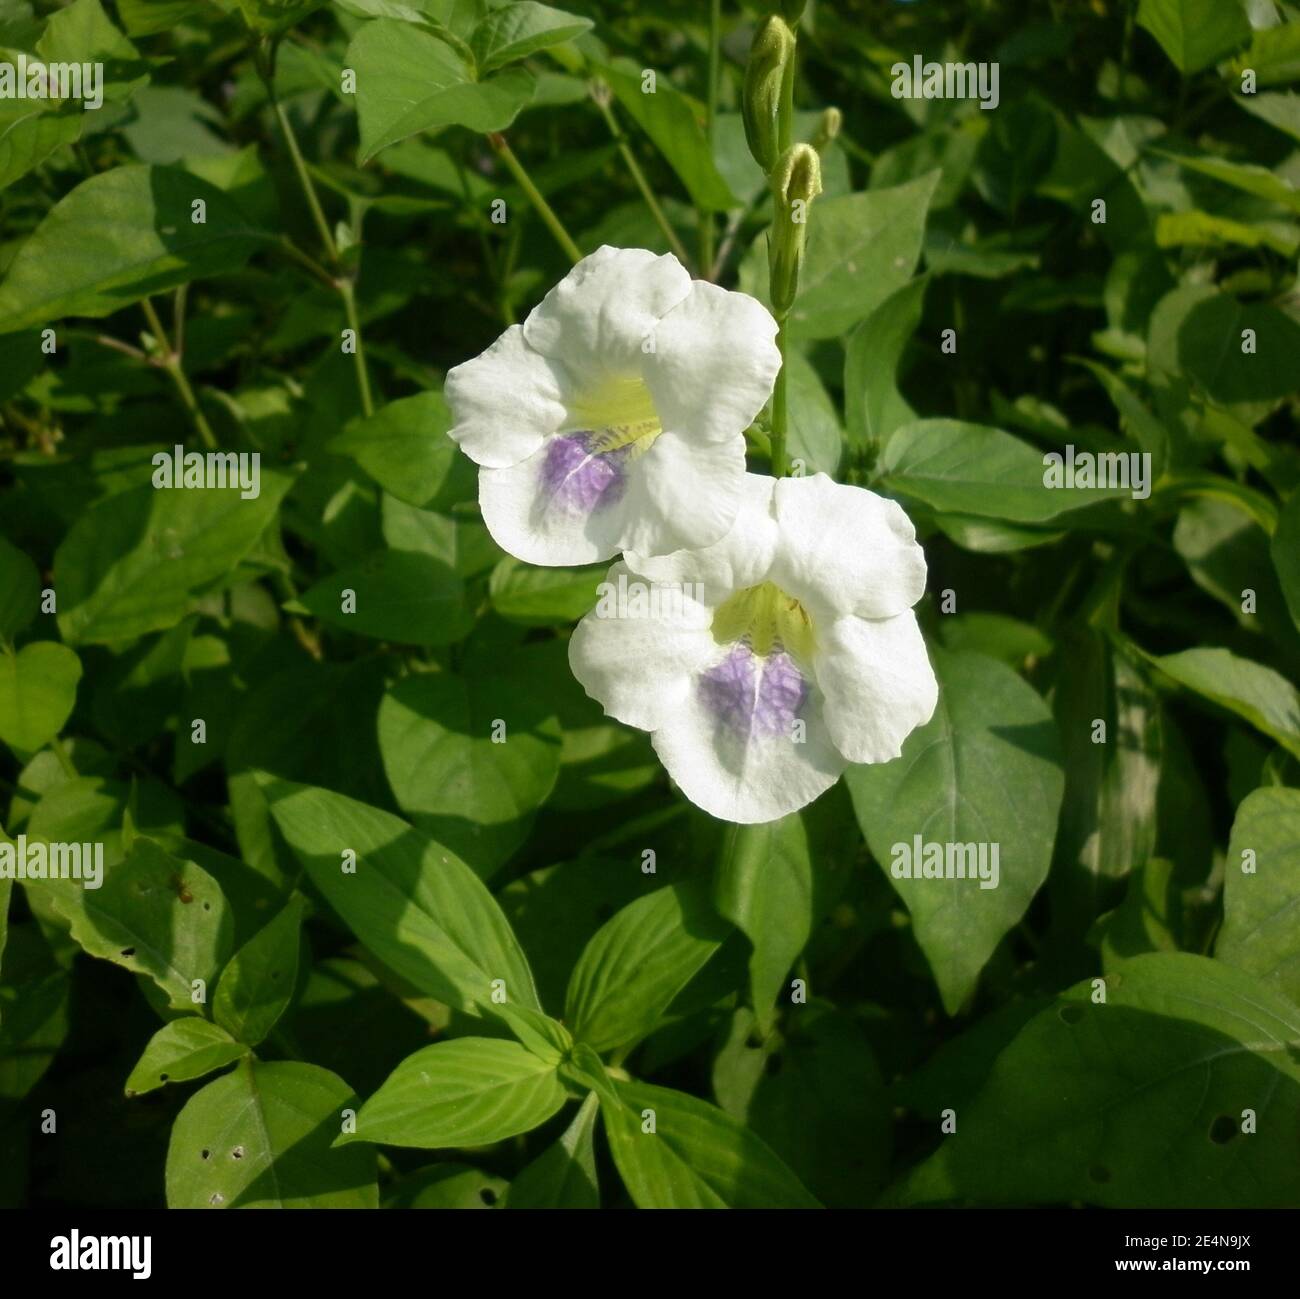 Two white and light purple mixed flowers close to each other Stock Photo